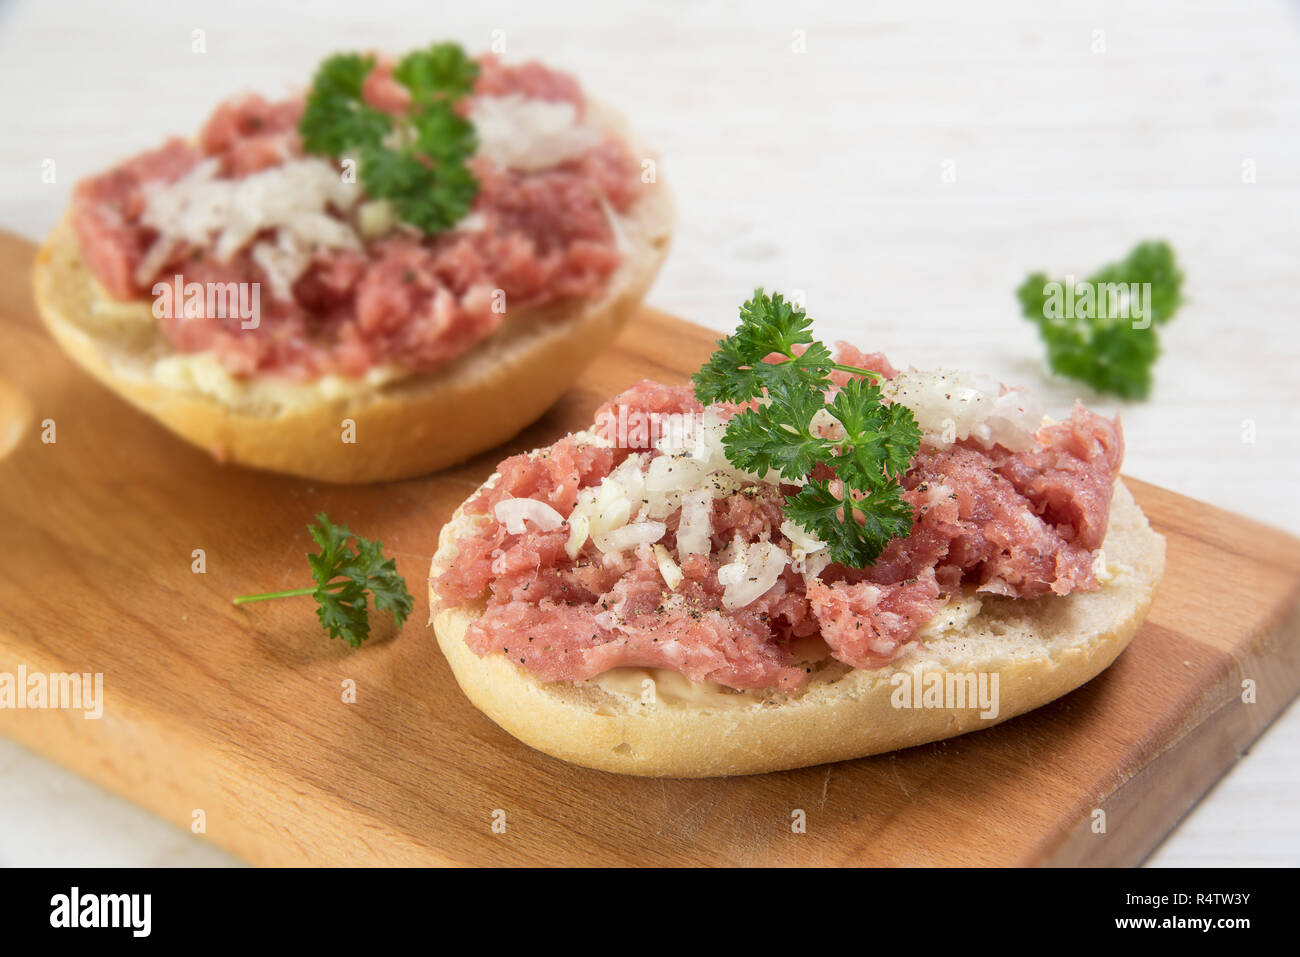 minced pork sausage, typical german mettwurst with onions and parsley garnish on a bun, kitchen board  on a white wooden table, close up with selected Stock Photo